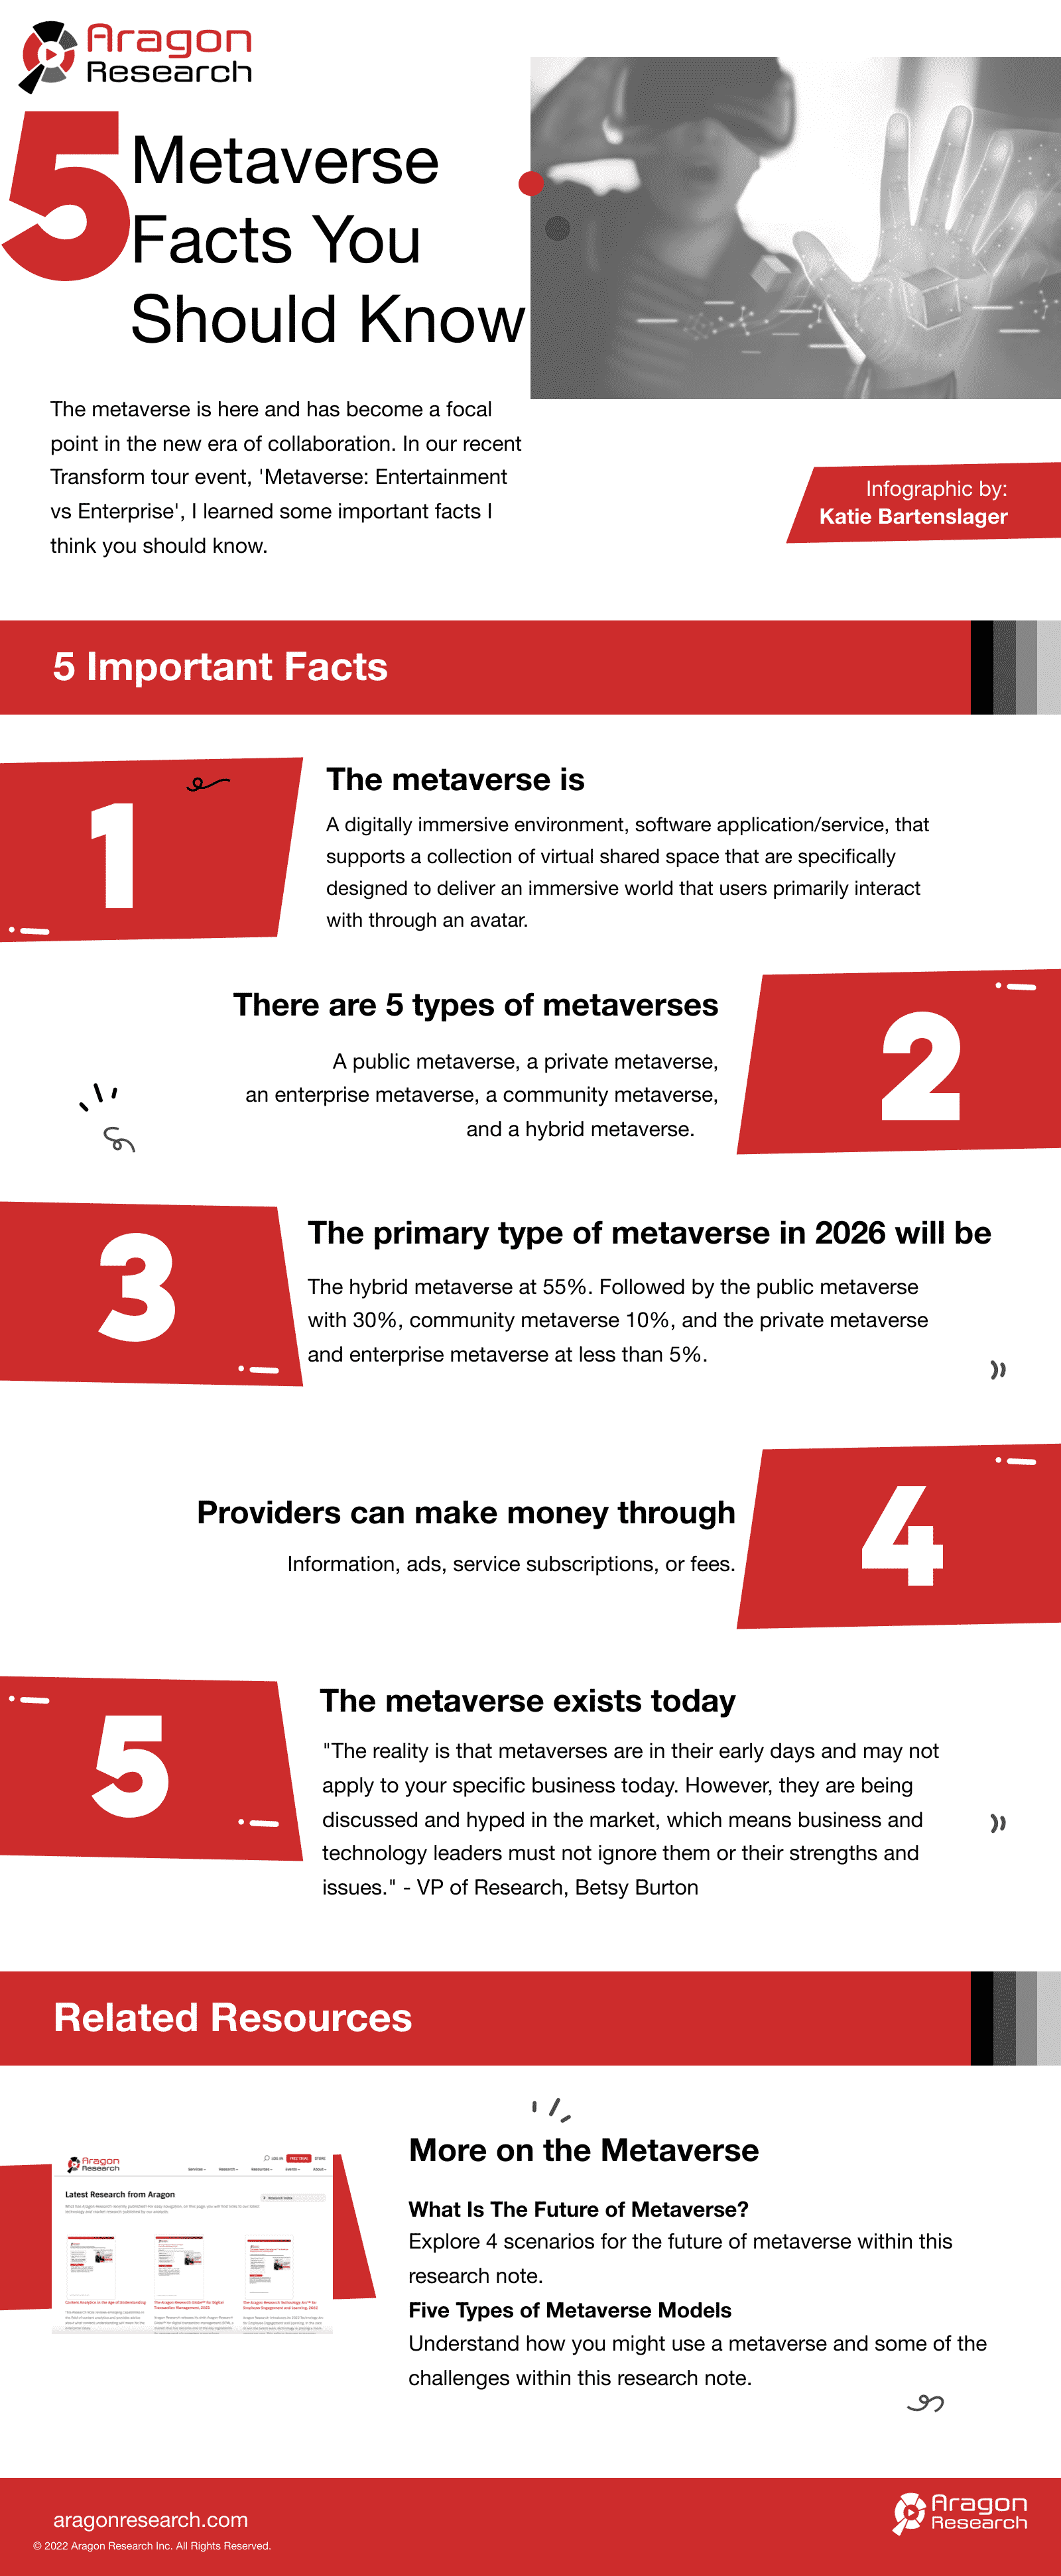 5 Metaverse facts you should know